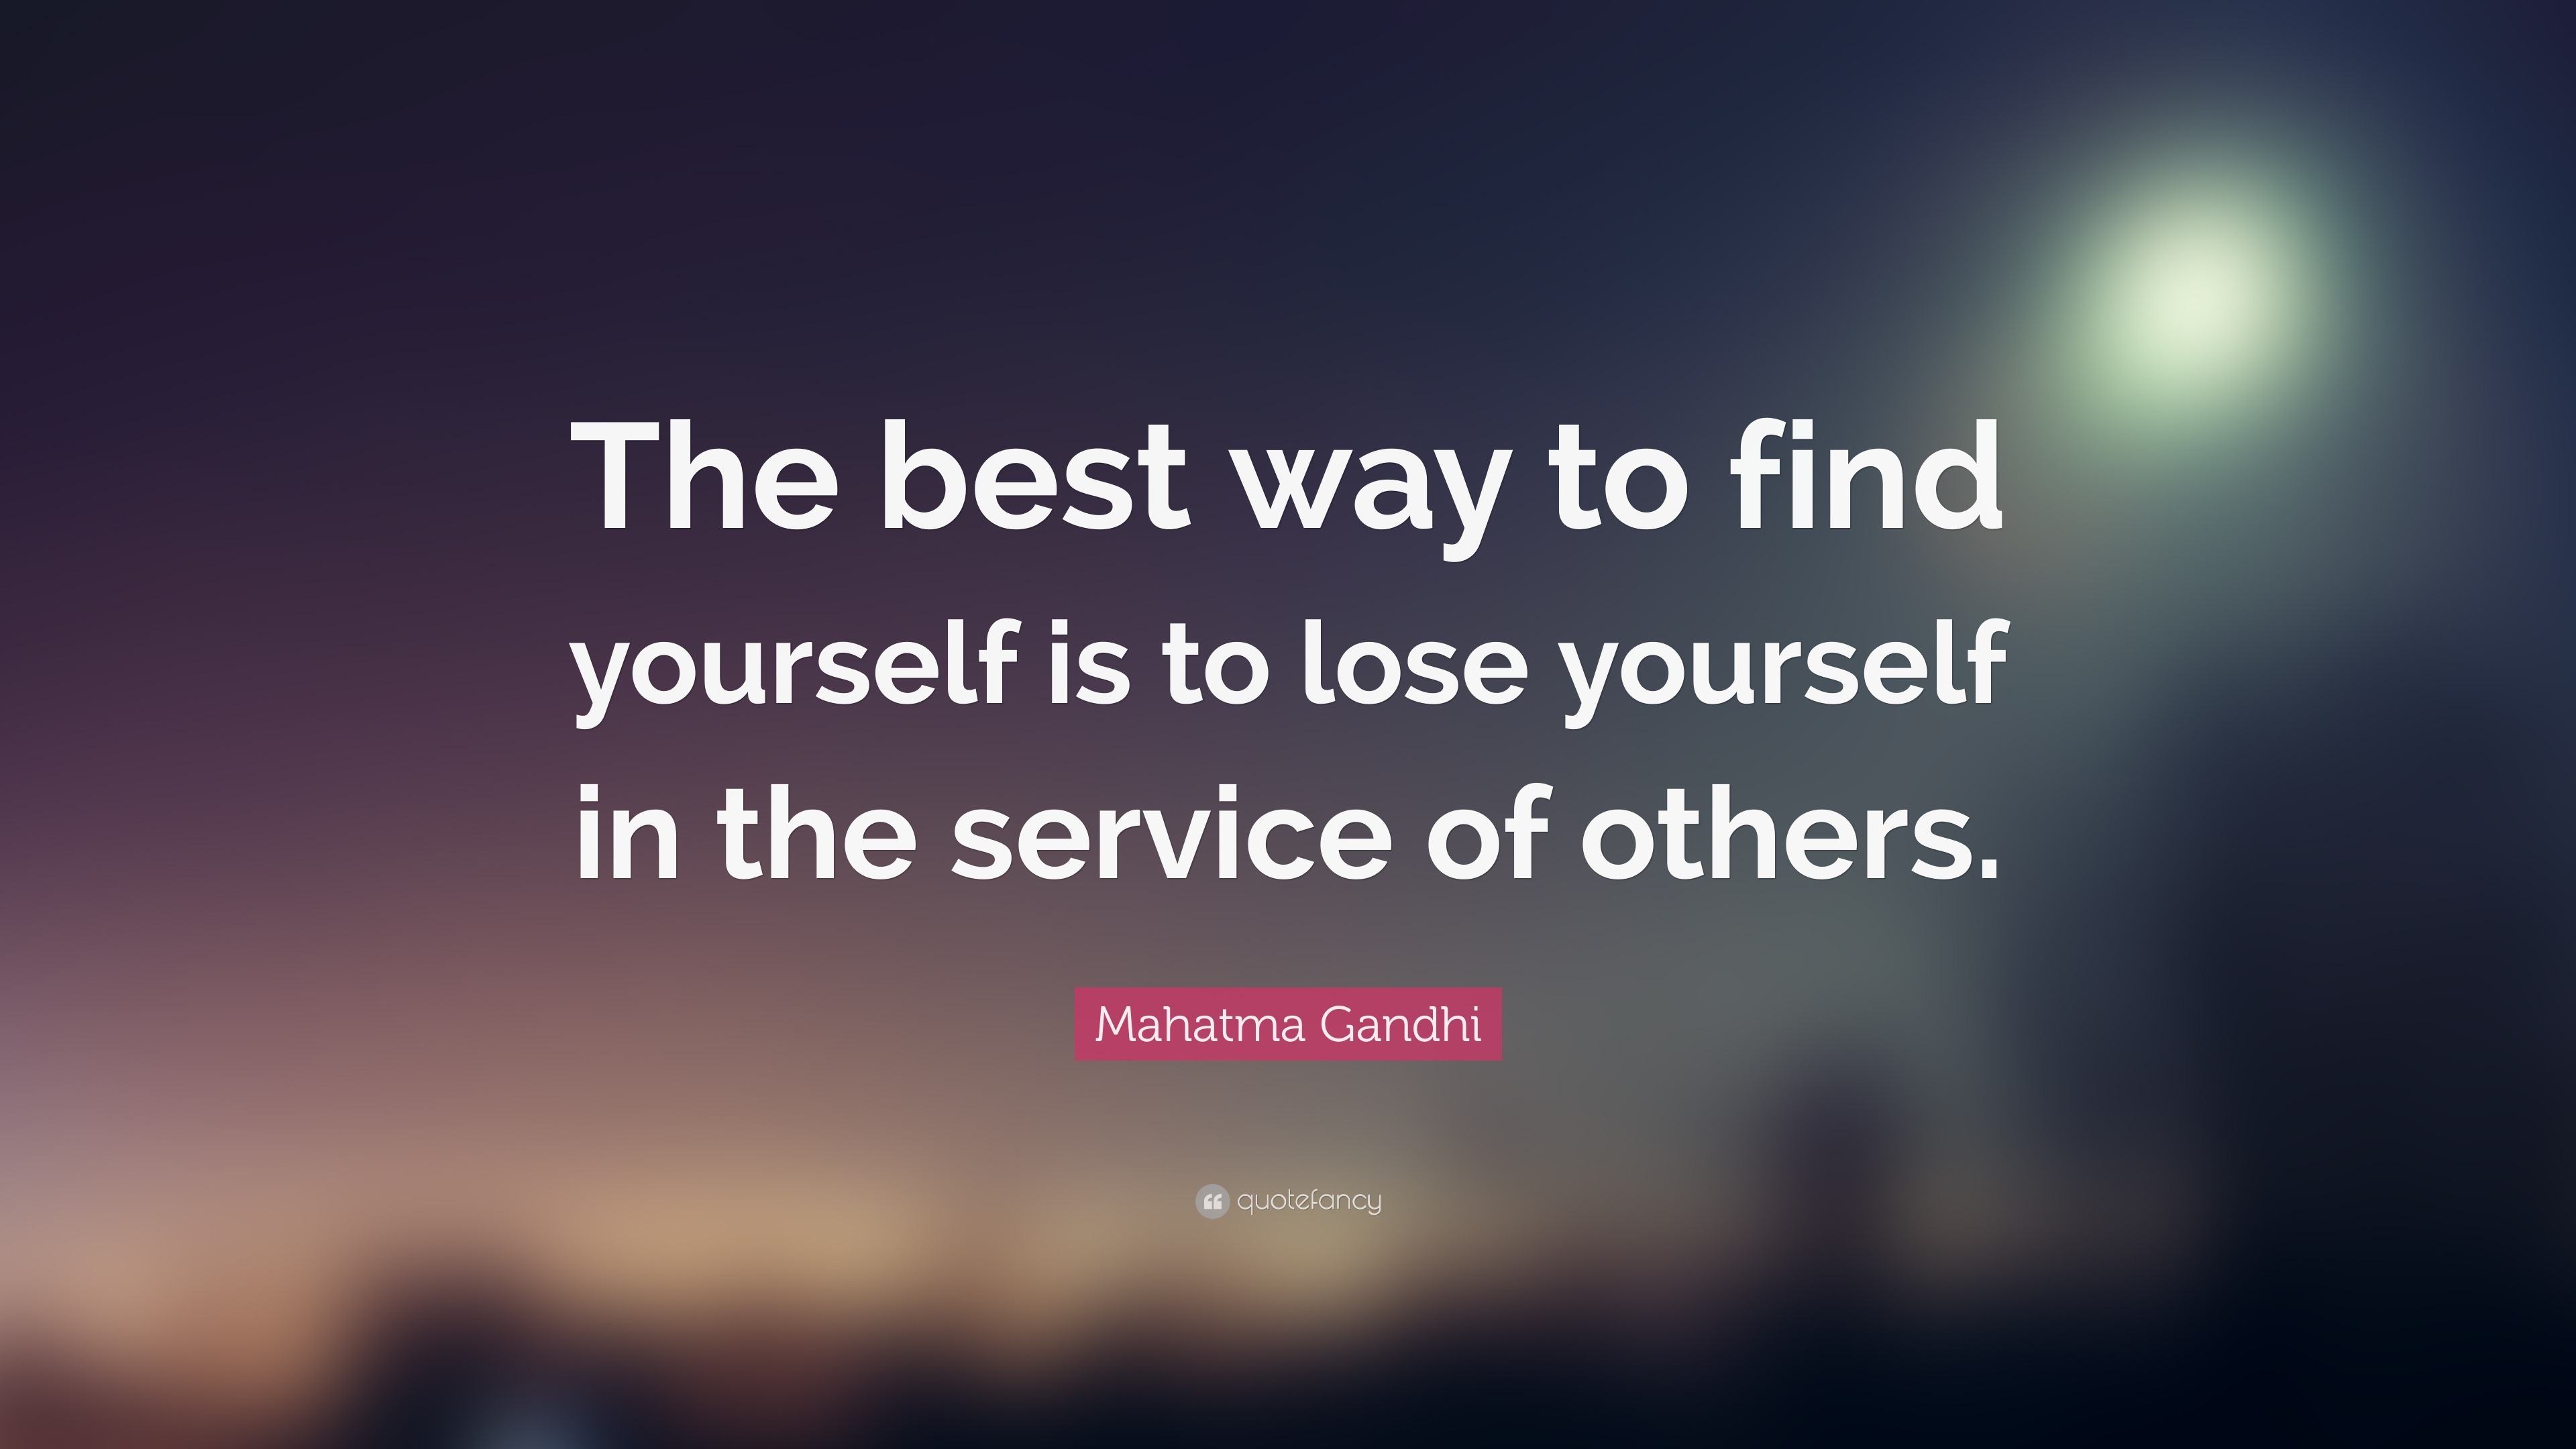 Mahatma Gandhi Quote: “The best way to find yourself is to lose ...